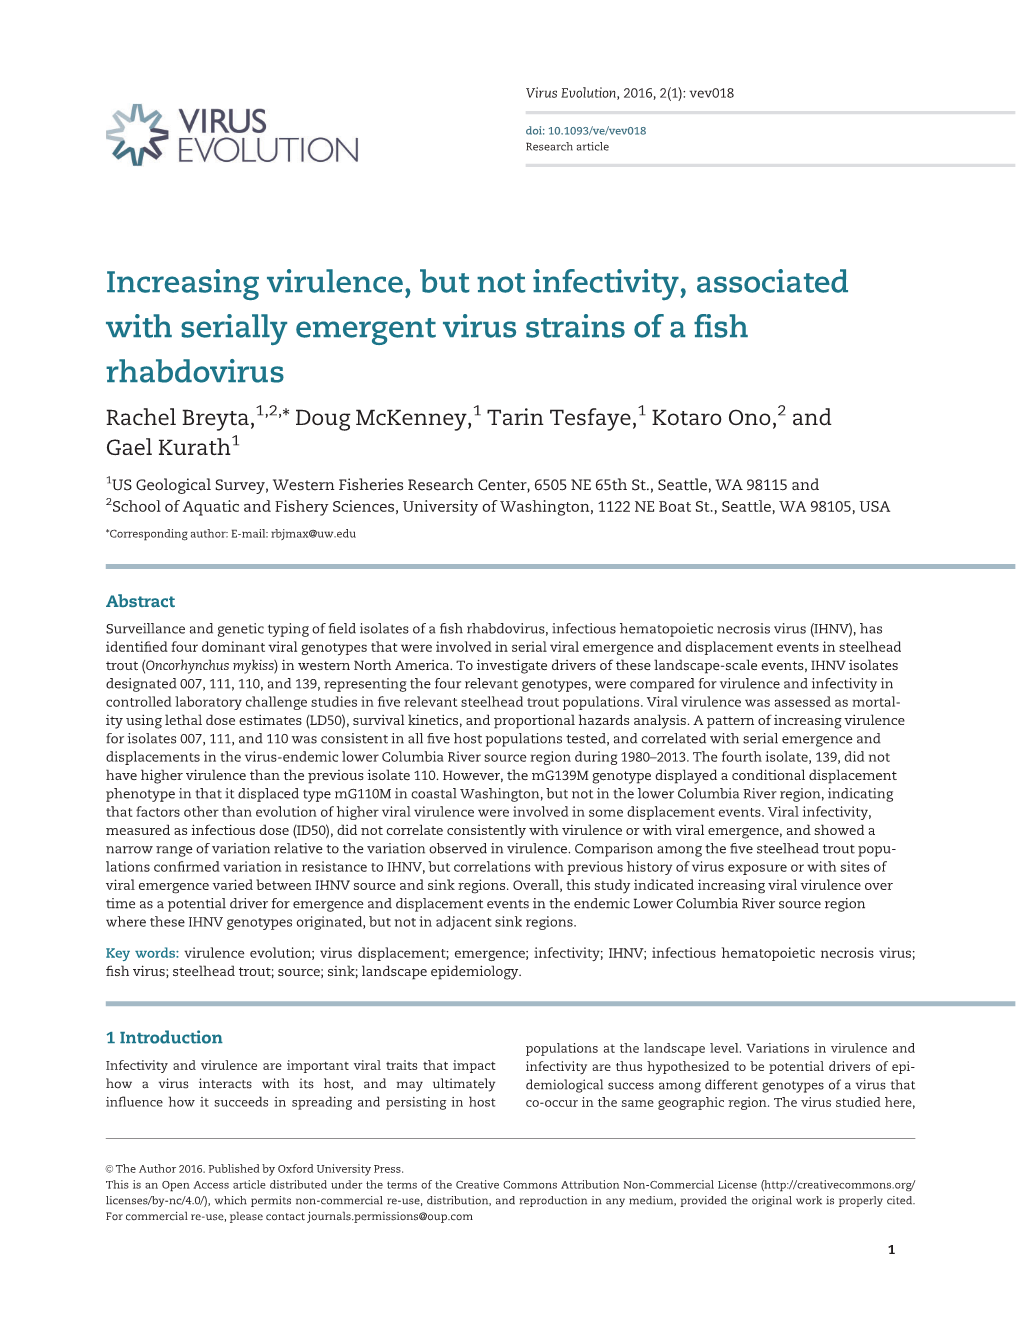 Increasing Virulence, but Not Infectivity, Associated with Serially